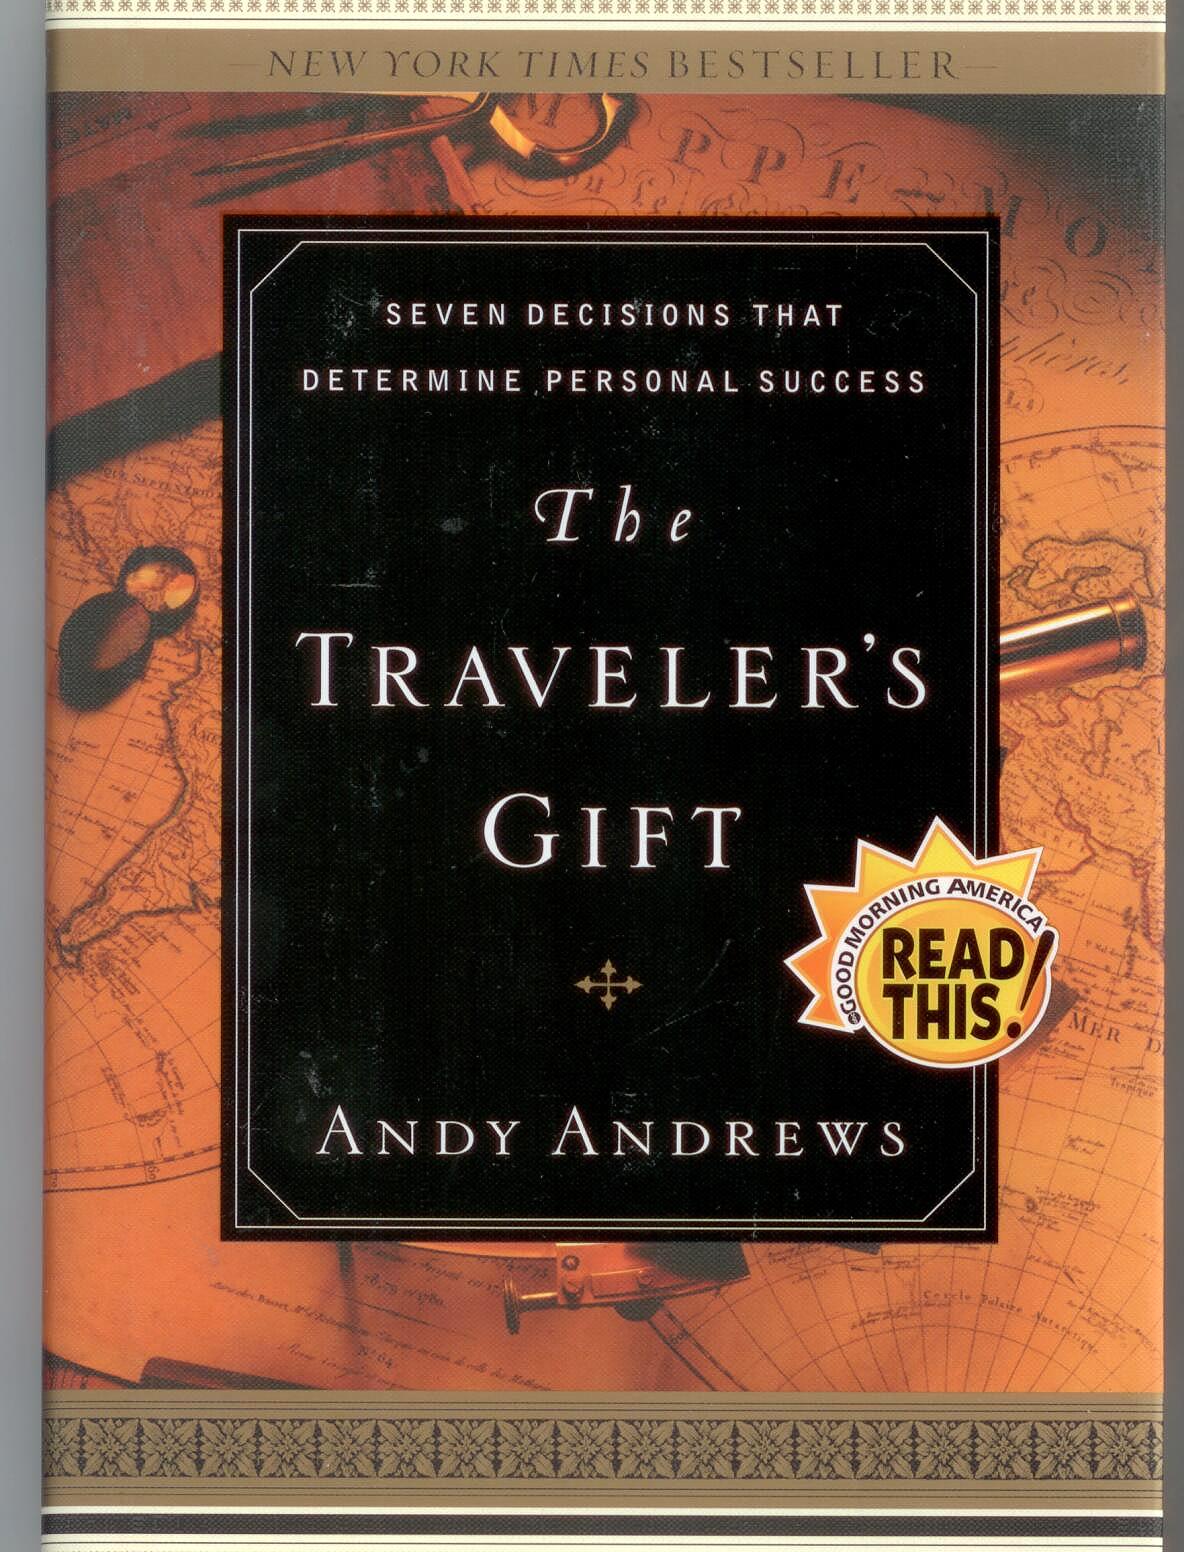 The Traveler's Gift by Andy Andrews